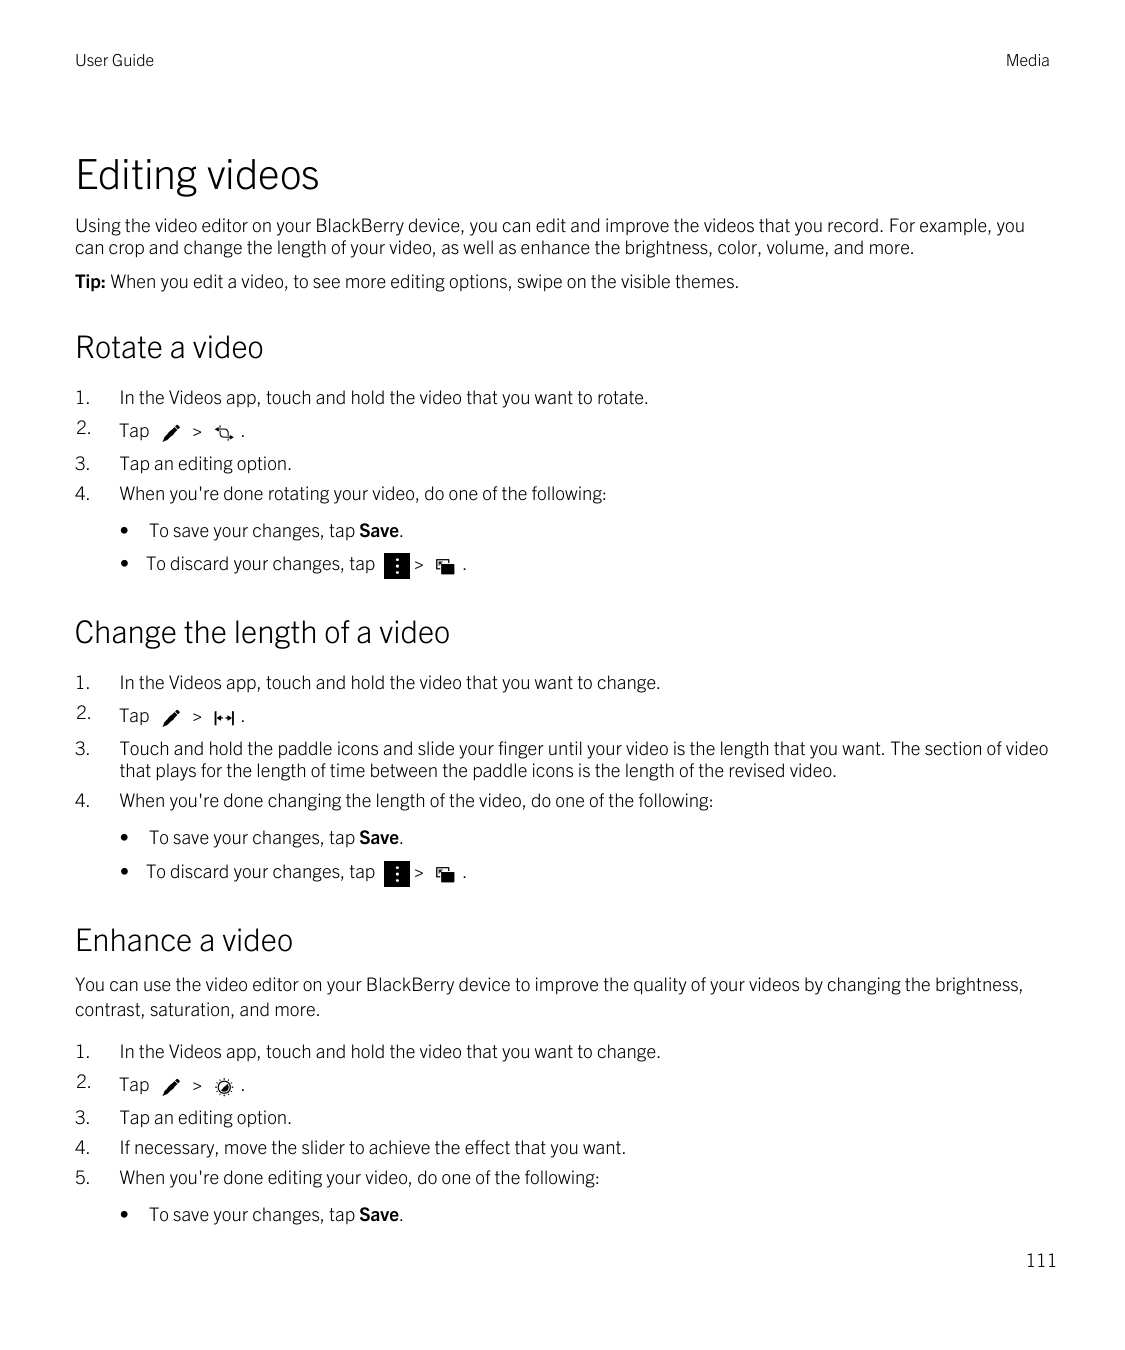 User GuideMediaEditing videosUsing the video editor on your BlackBerry device, you can edit and improve the videos that you reco